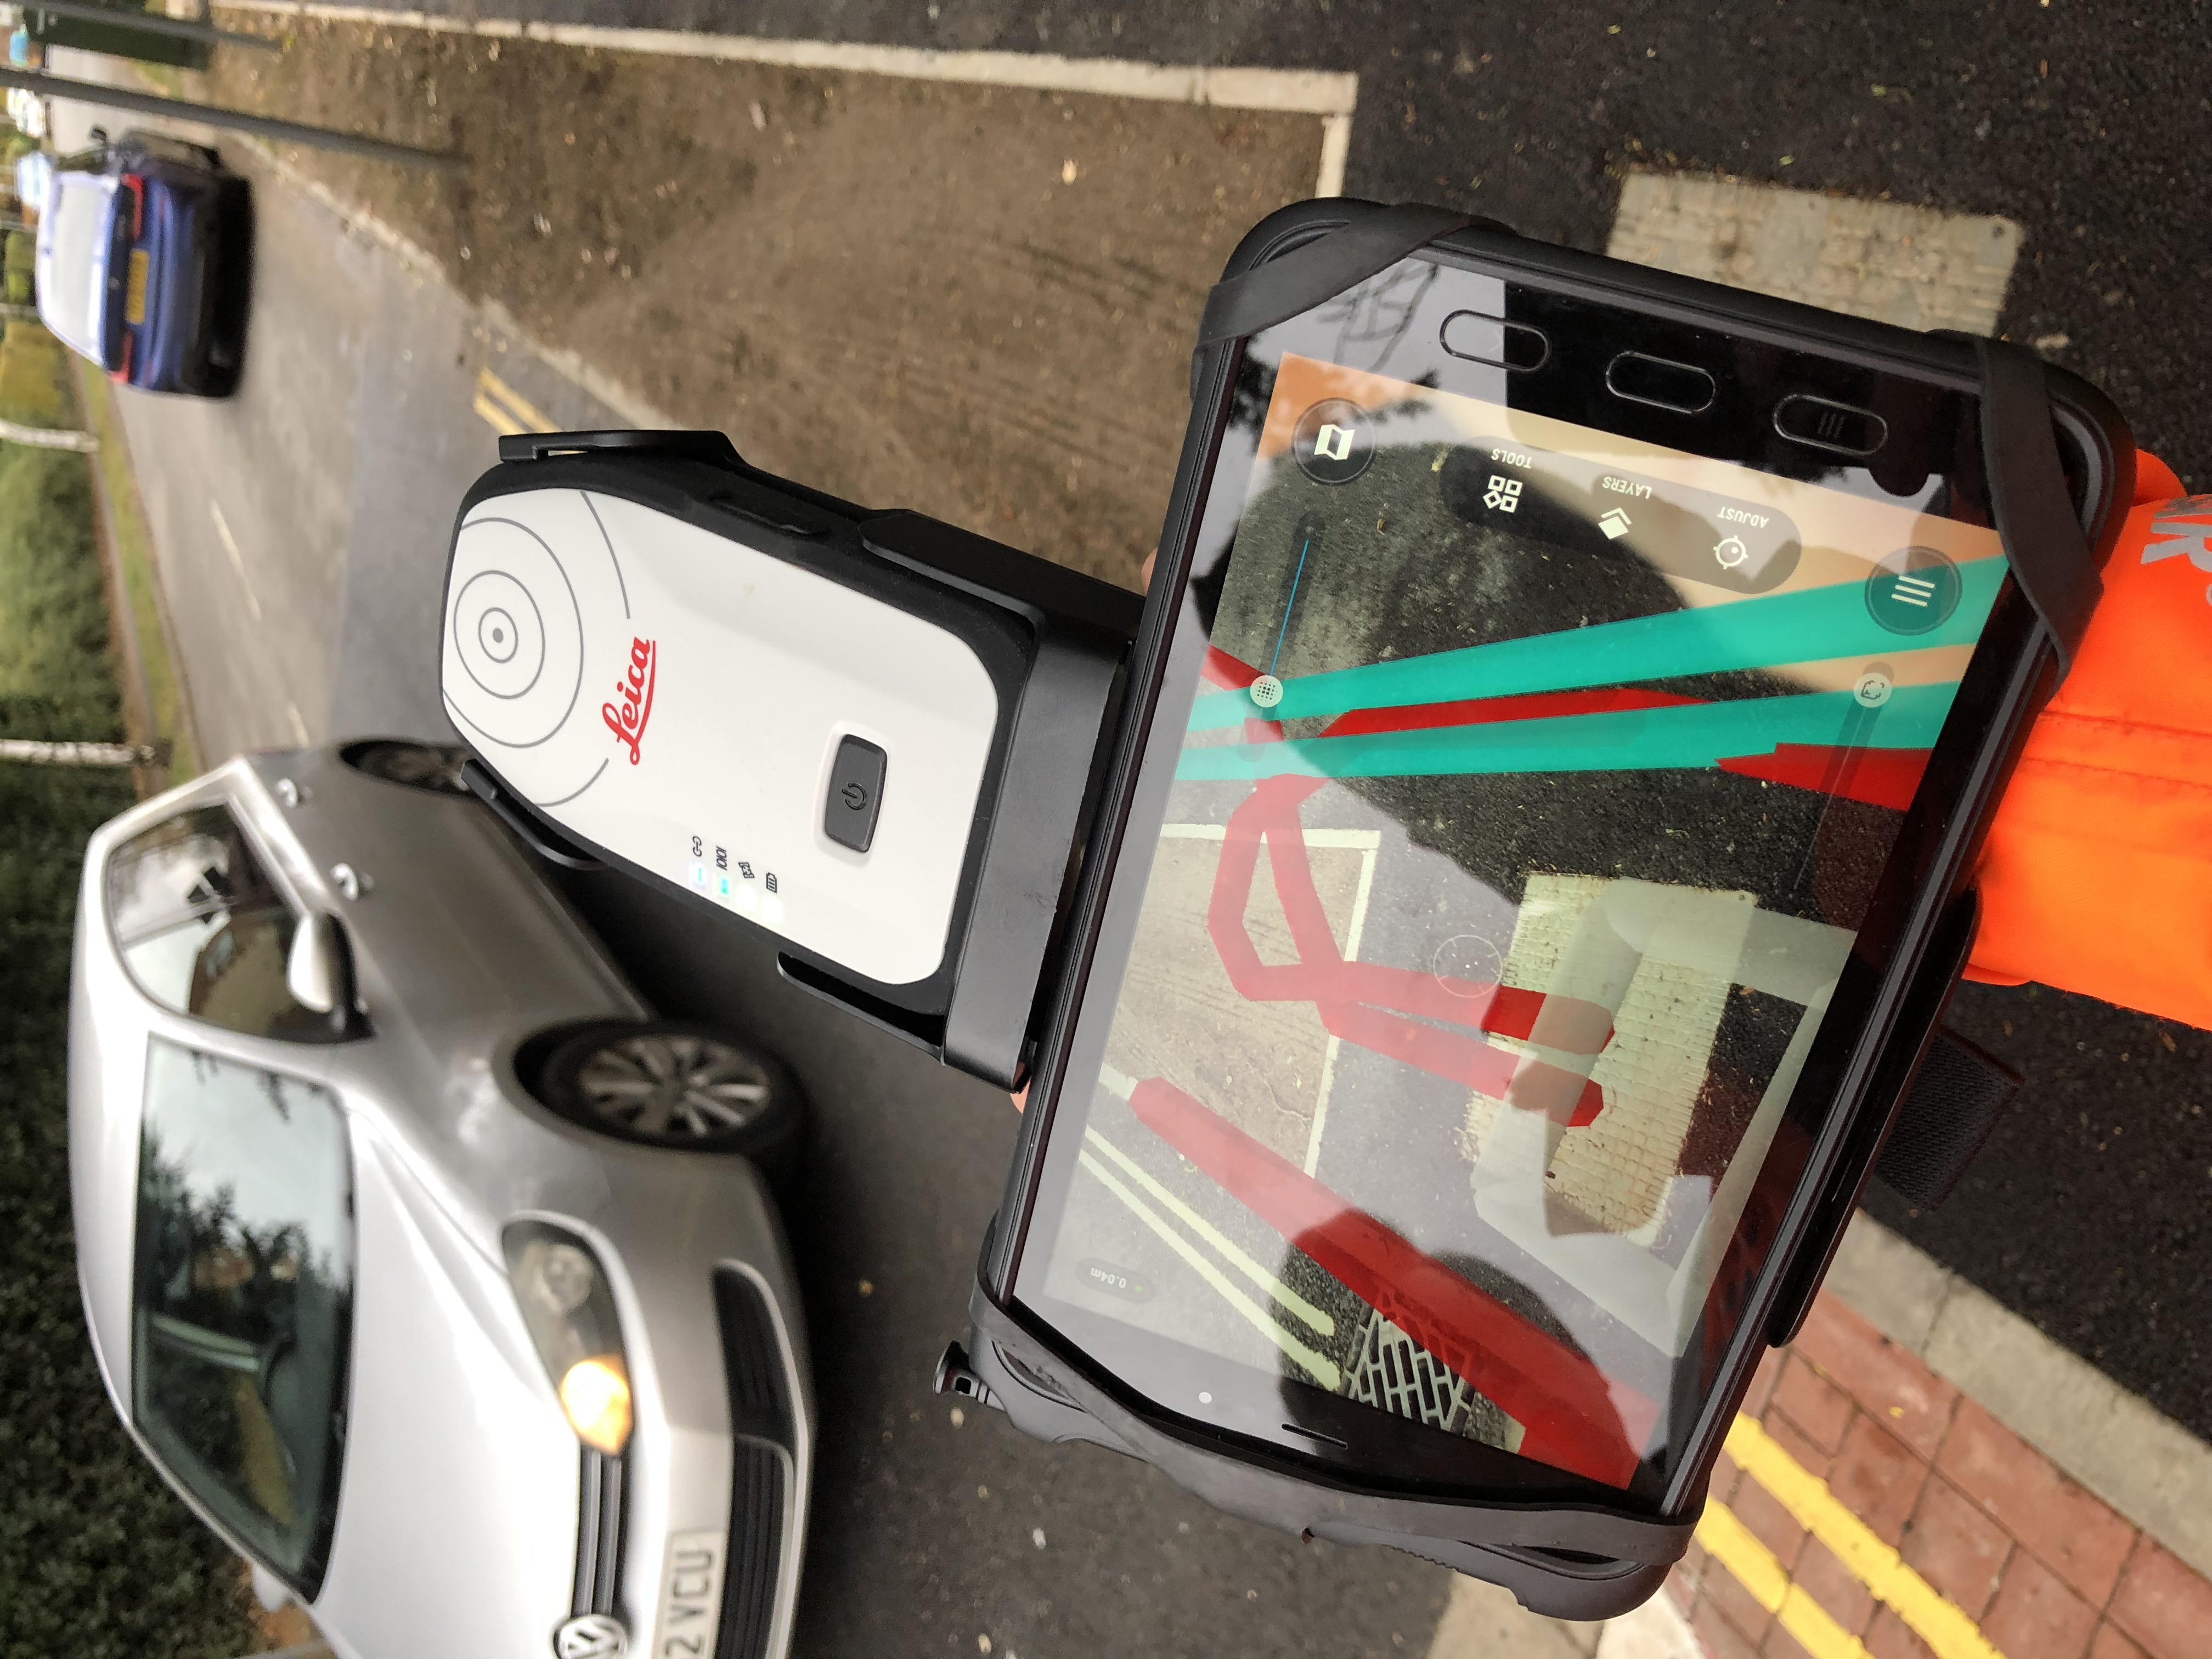 Milestone Infrastructure undertakes innovative augmented reality trial